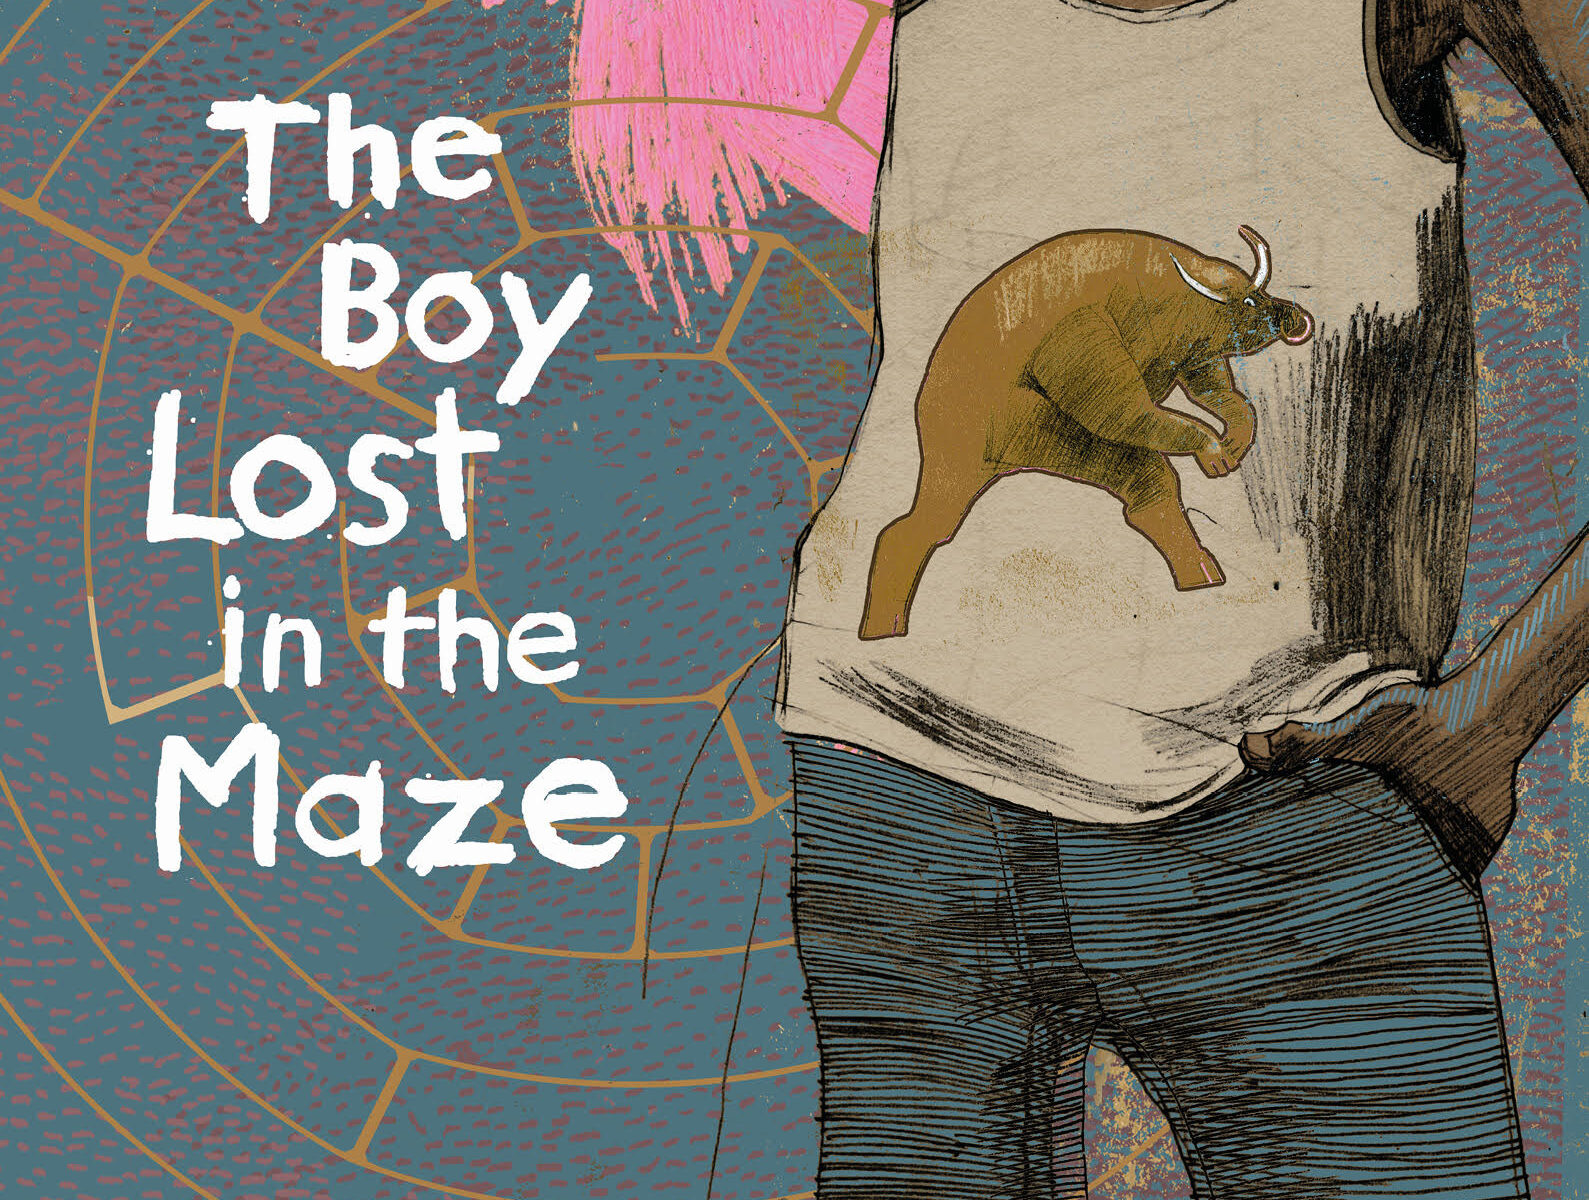 Cover of The Boy Lost in the Maze by Joseph Coelho